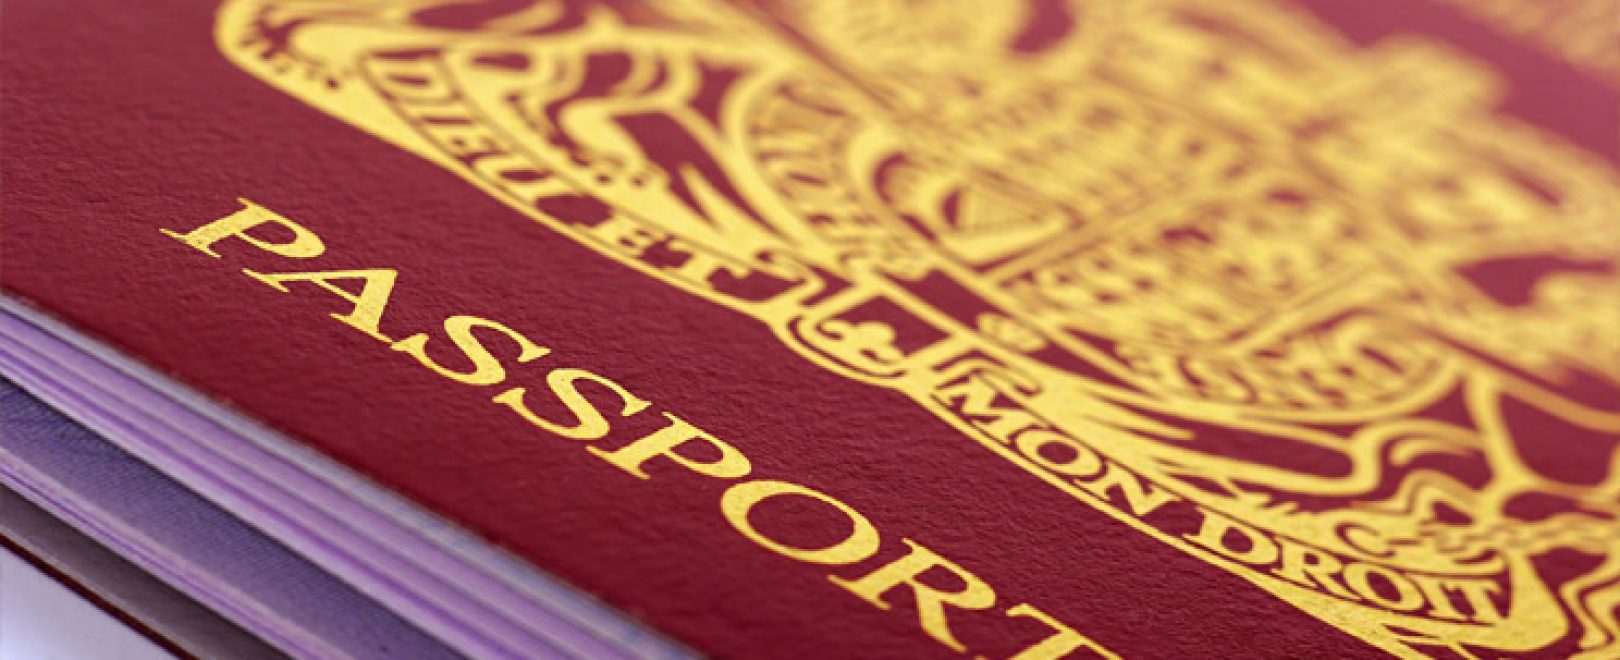 How to Become a British Citizen? | US Visa Help